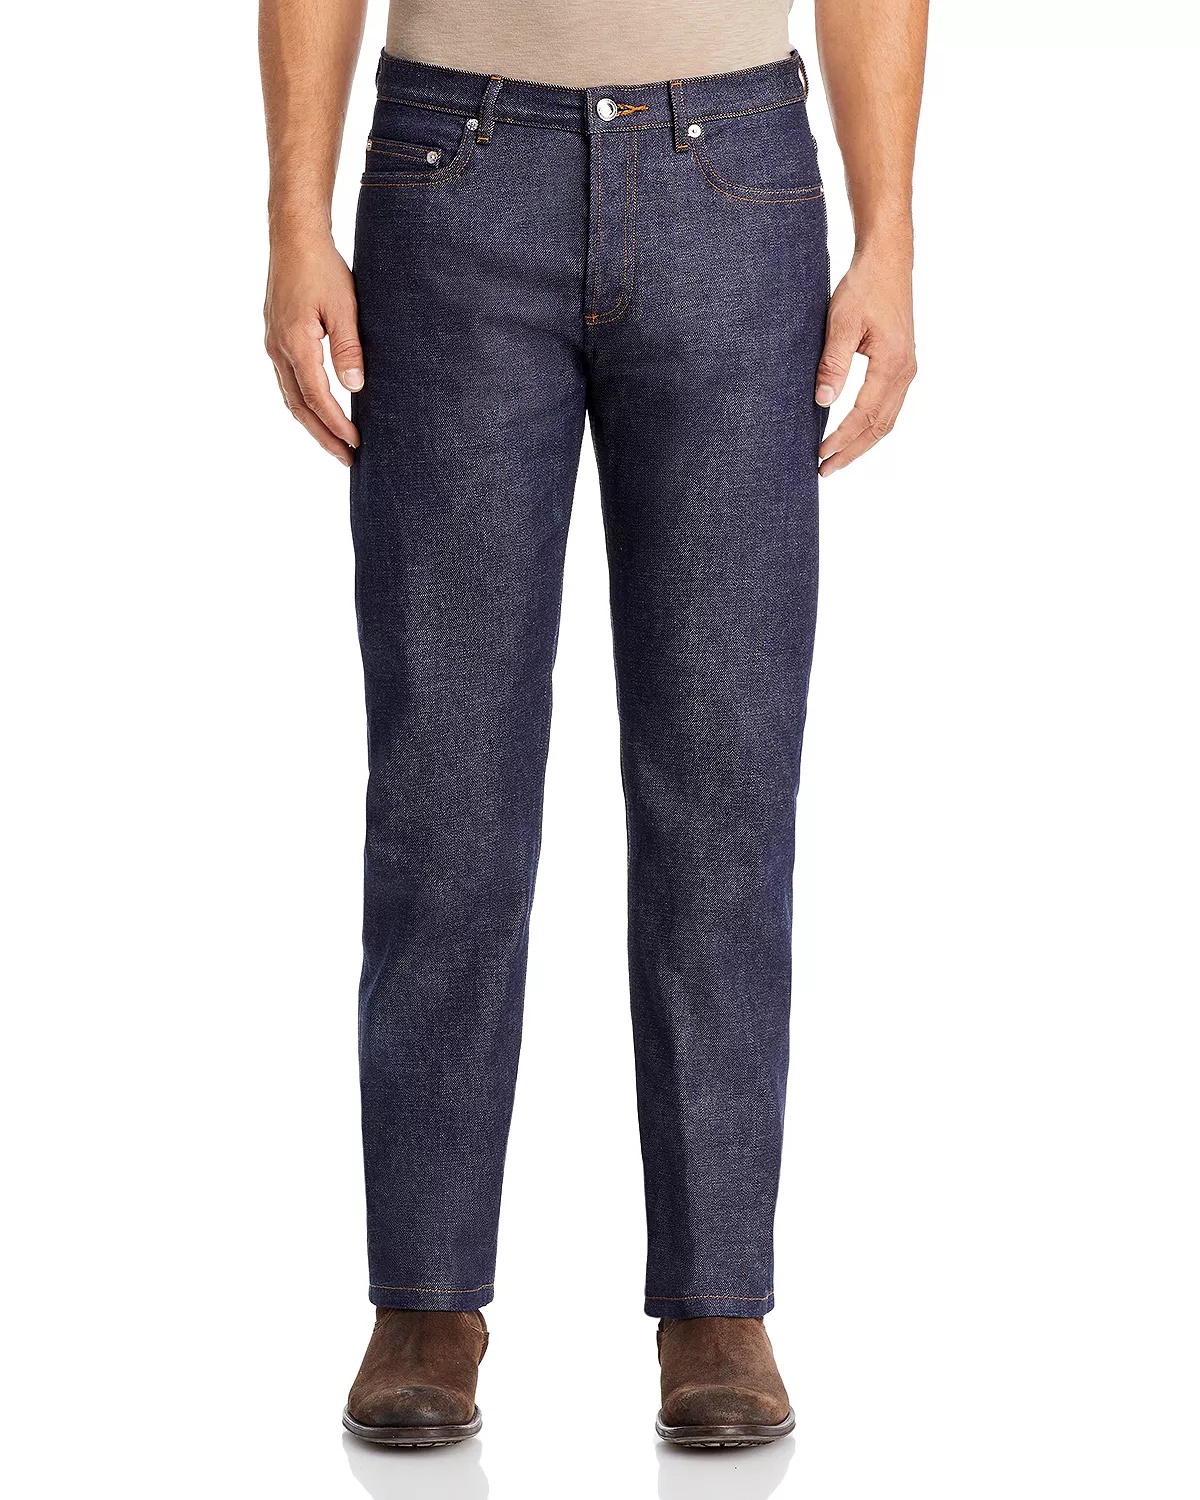 New Standard Straight Fit Jeans in Indigo - 1